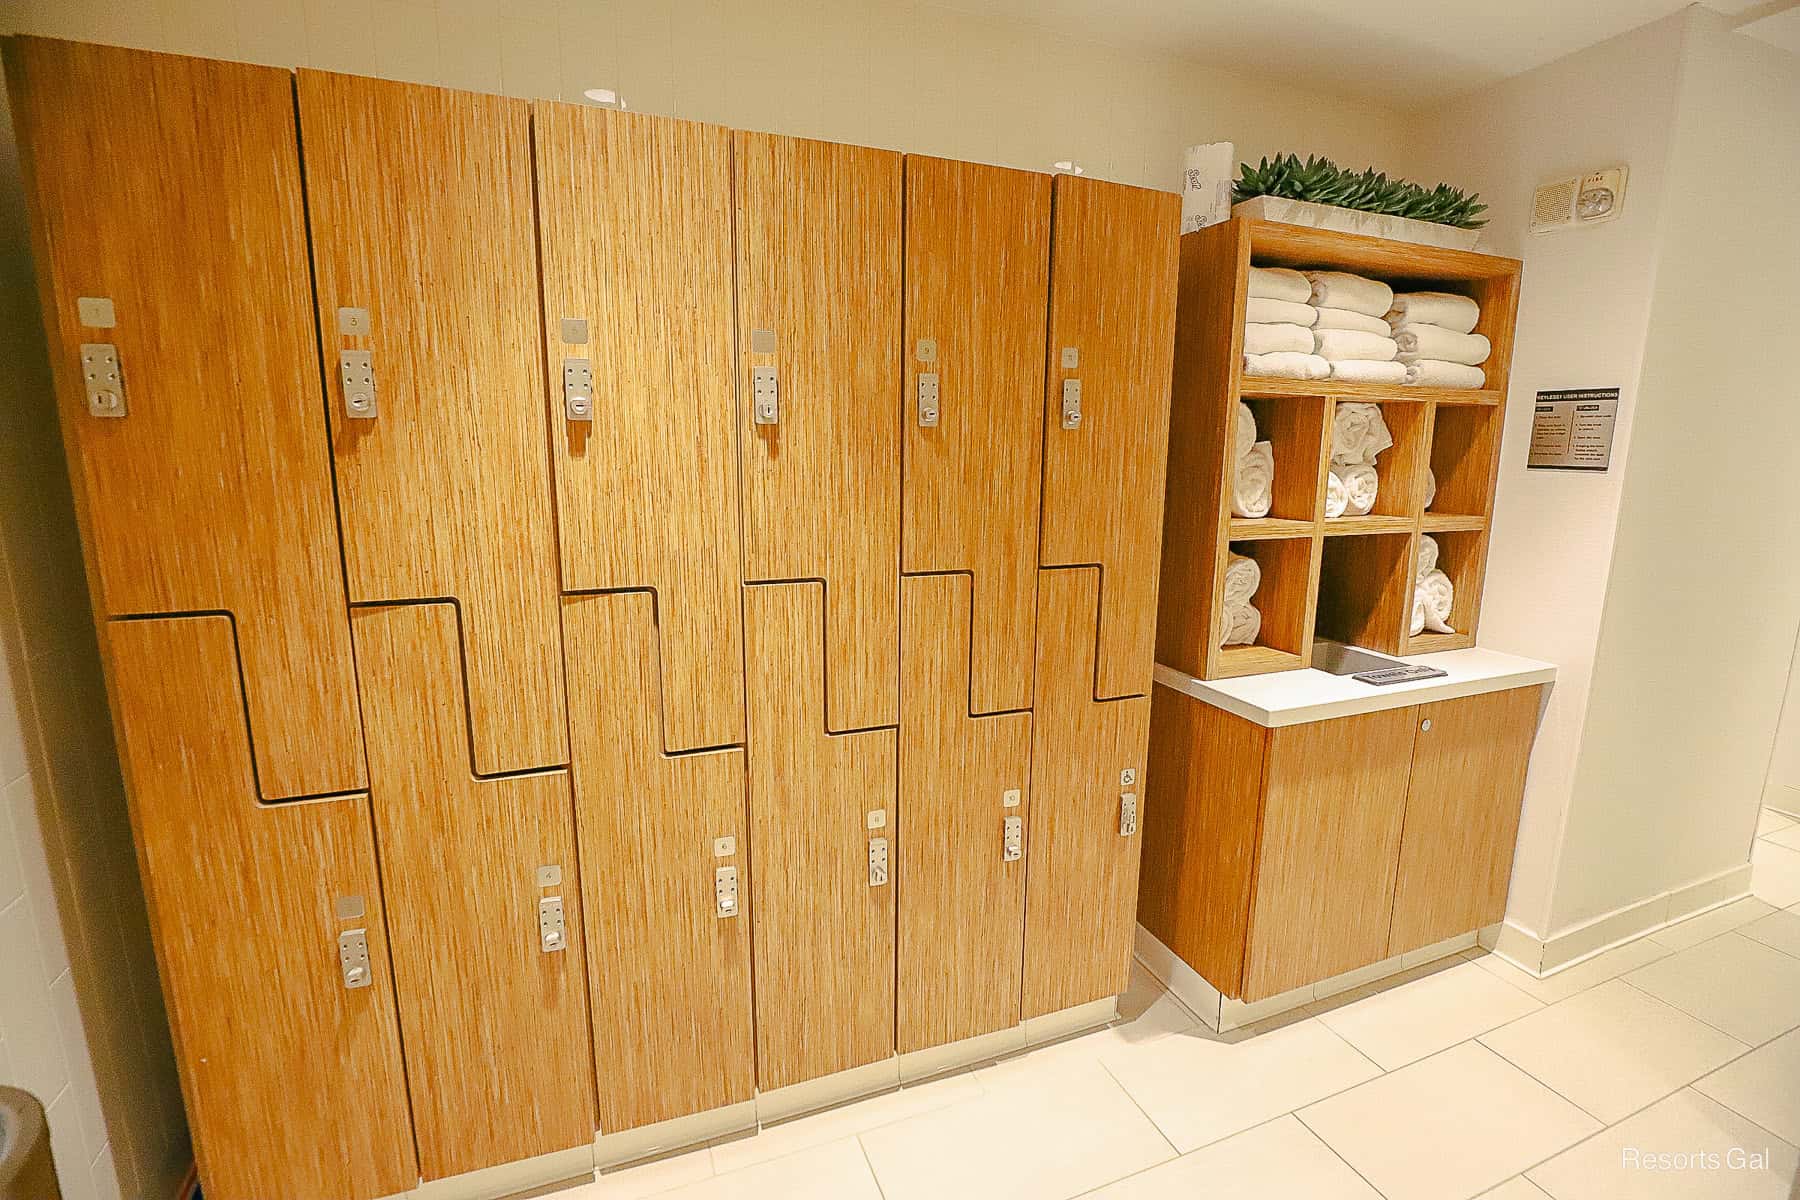 complimentary lockers for guests to store items while using the pools